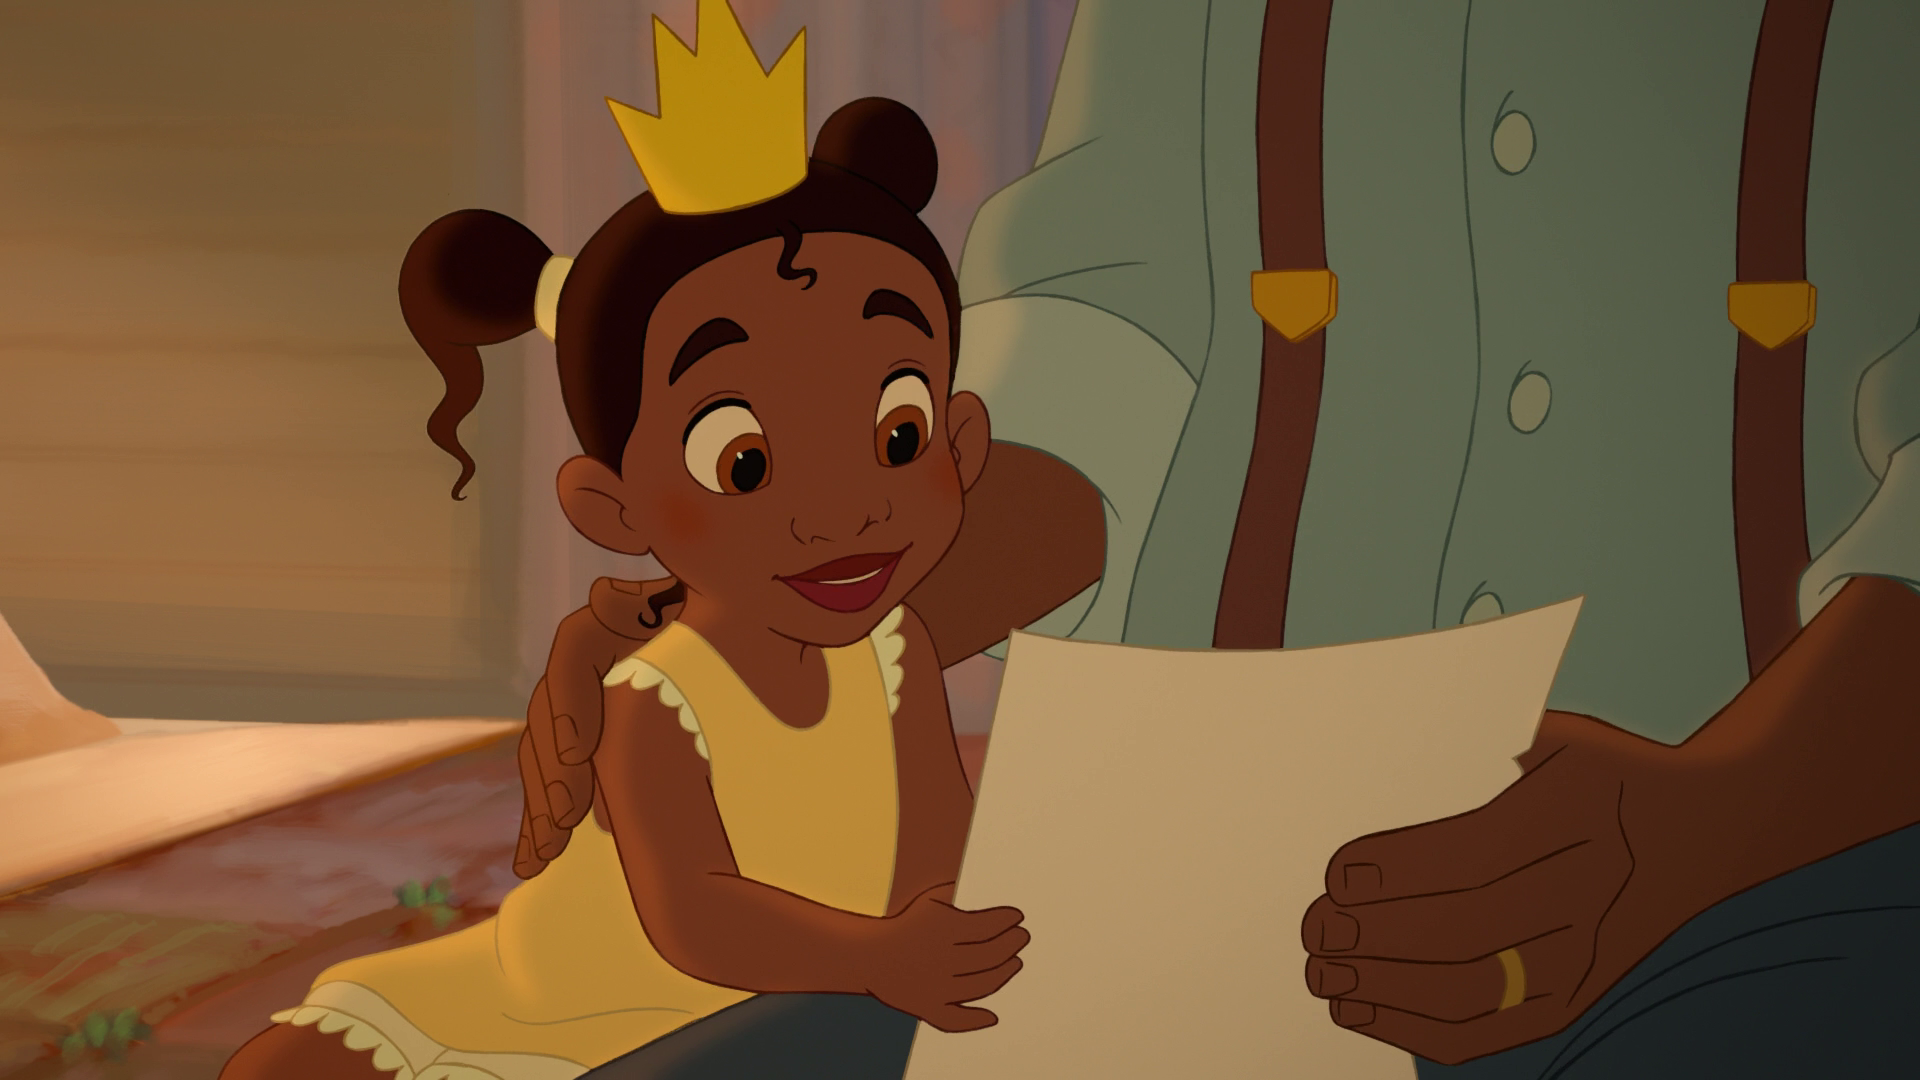  The.Princess.And.The.Frog.2009.1080p.Bluray.x264-LCHD 6.56GB-5.png